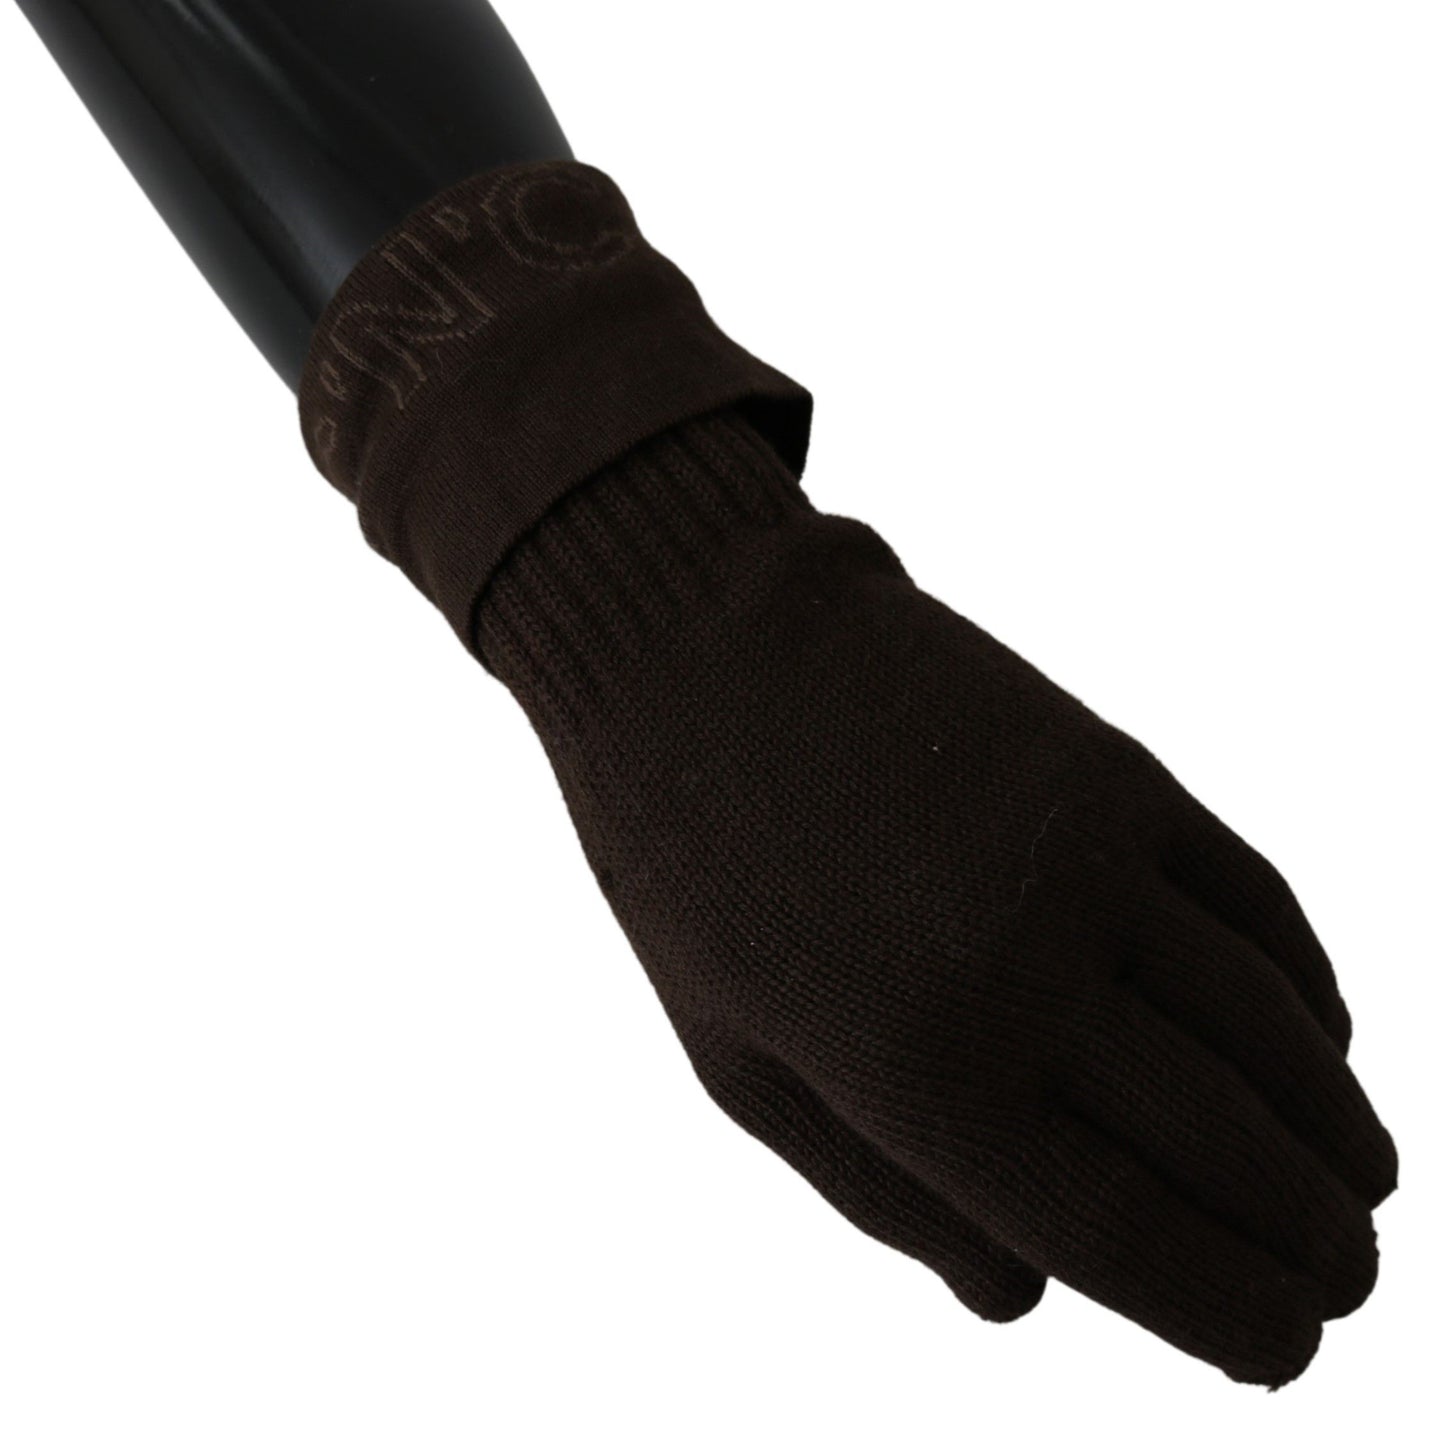 Brown Wool Knitted One Size Wrist Length Gloves - Designed by Costume National Available to Buy at a Discounted Price on Moon Behind The Hill Online Designer Discount Store